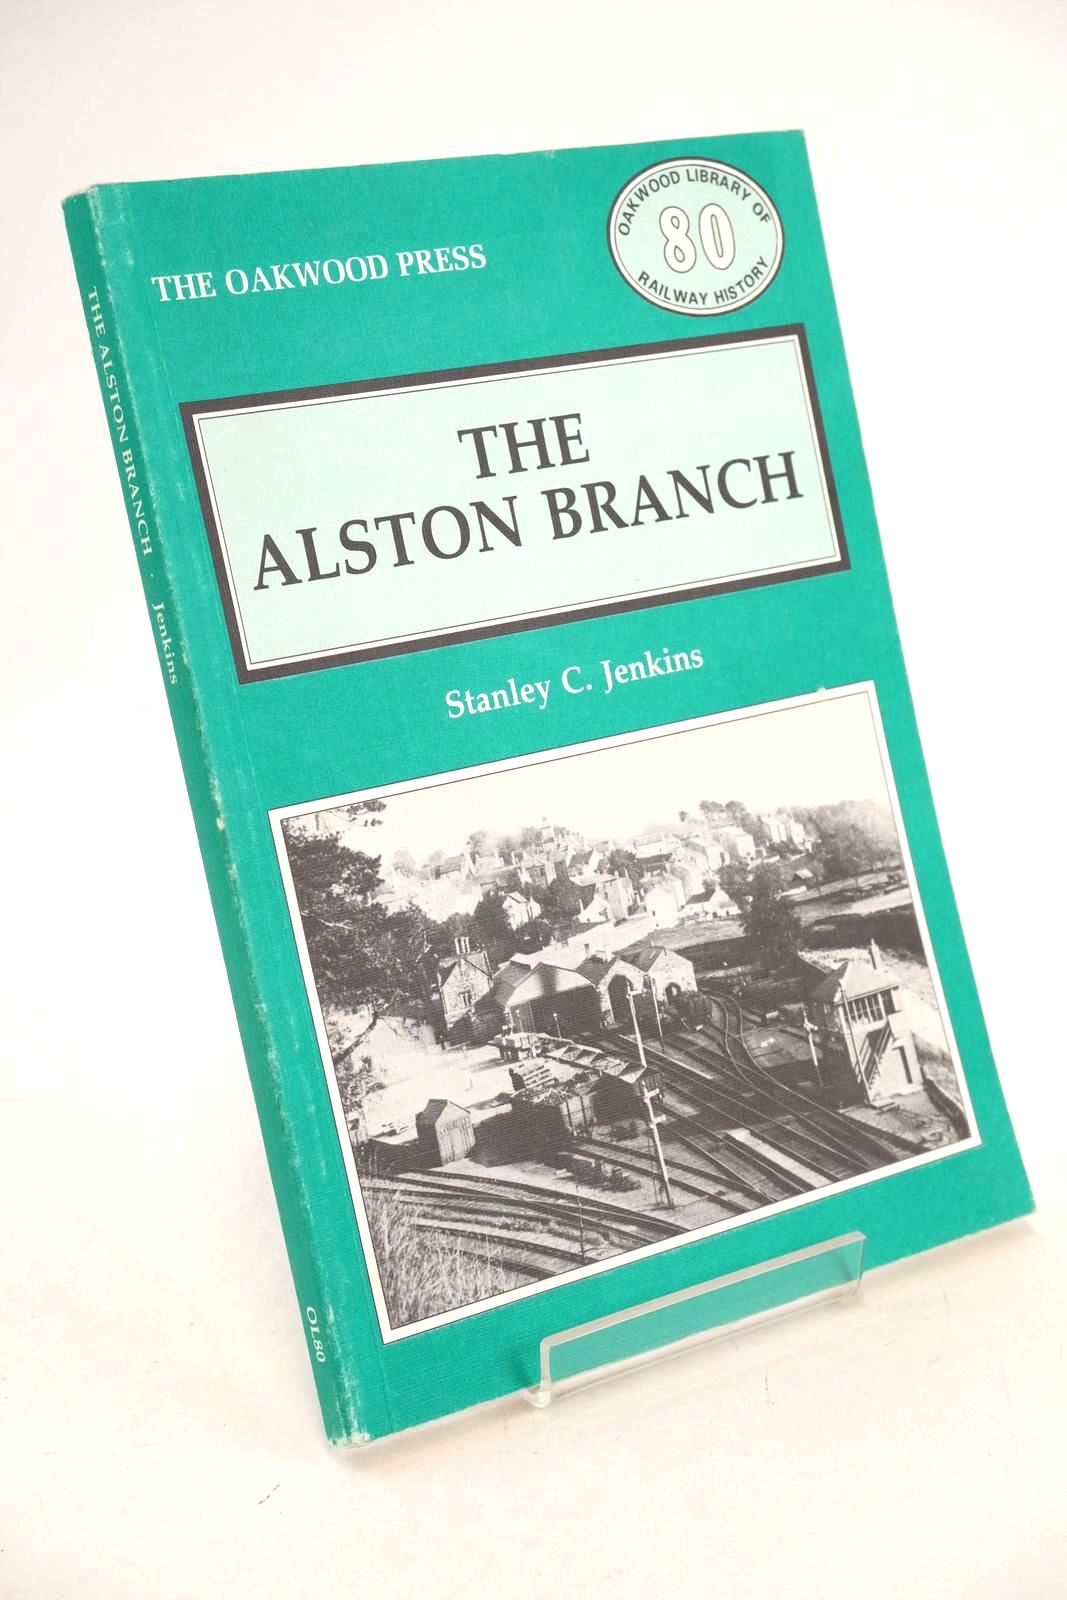 Photo of THE ALSTON BRANCH written by Jenkins, Stanley C. published by The Oakwood Press (STOCK CODE: 1327101)  for sale by Stella & Rose's Books